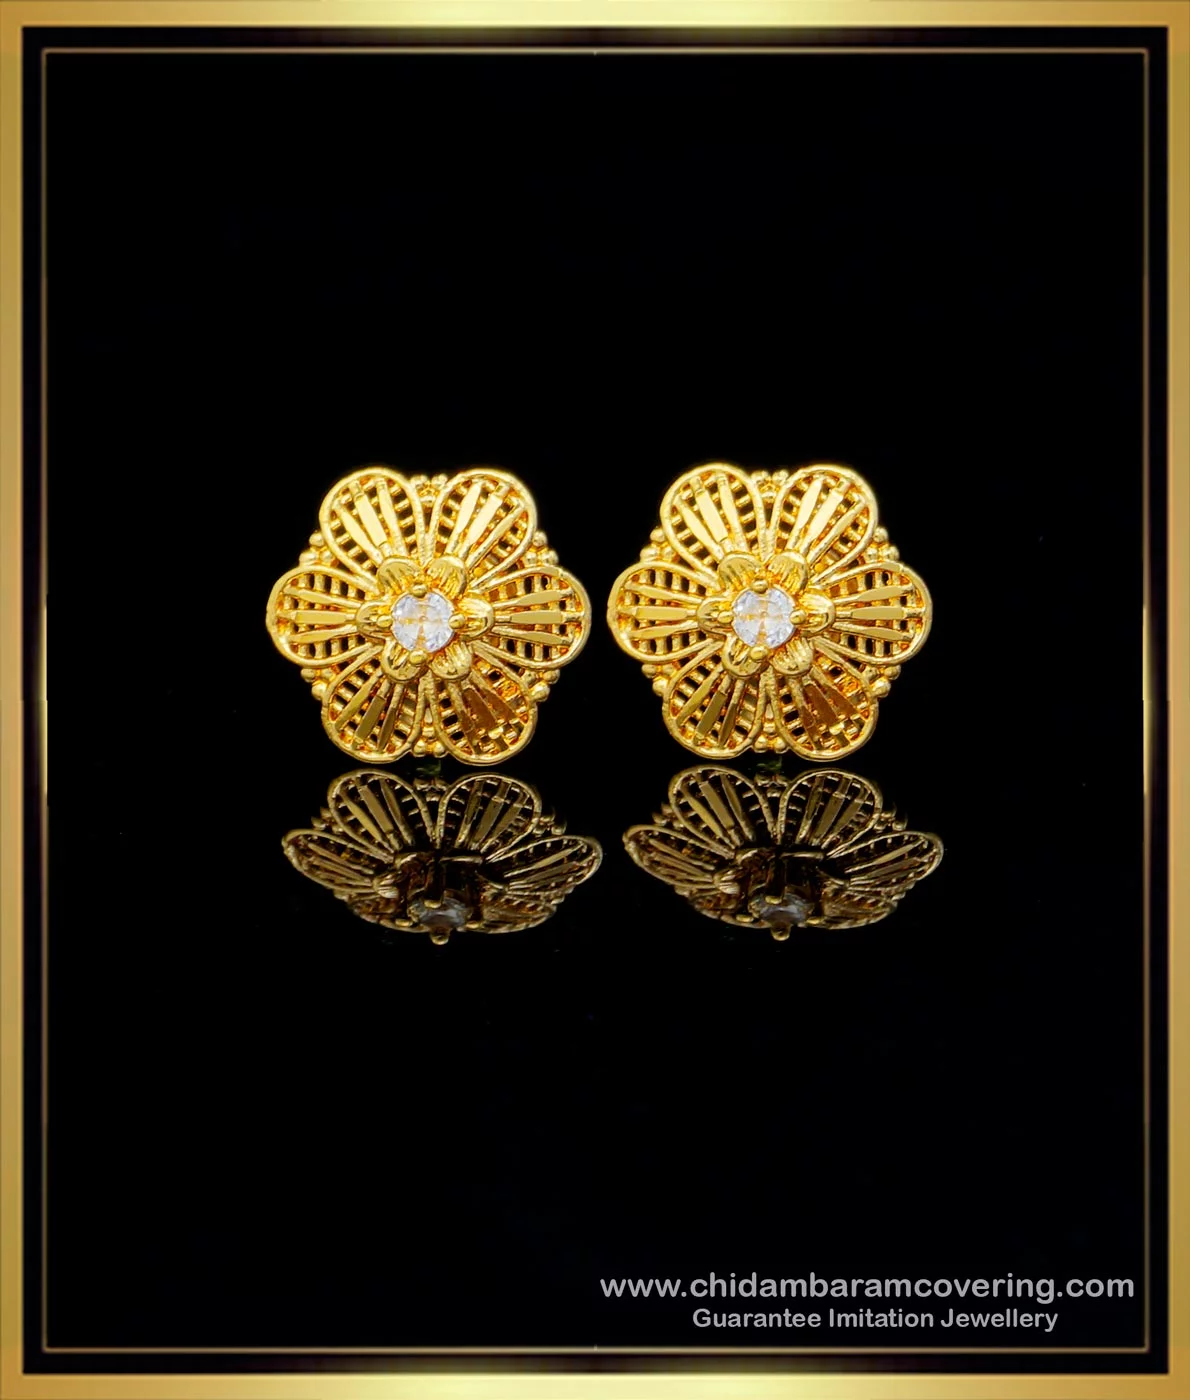 Bridal Gold Earrings New Design | Gold Bridal Earrings Designs With Price -  YouTube